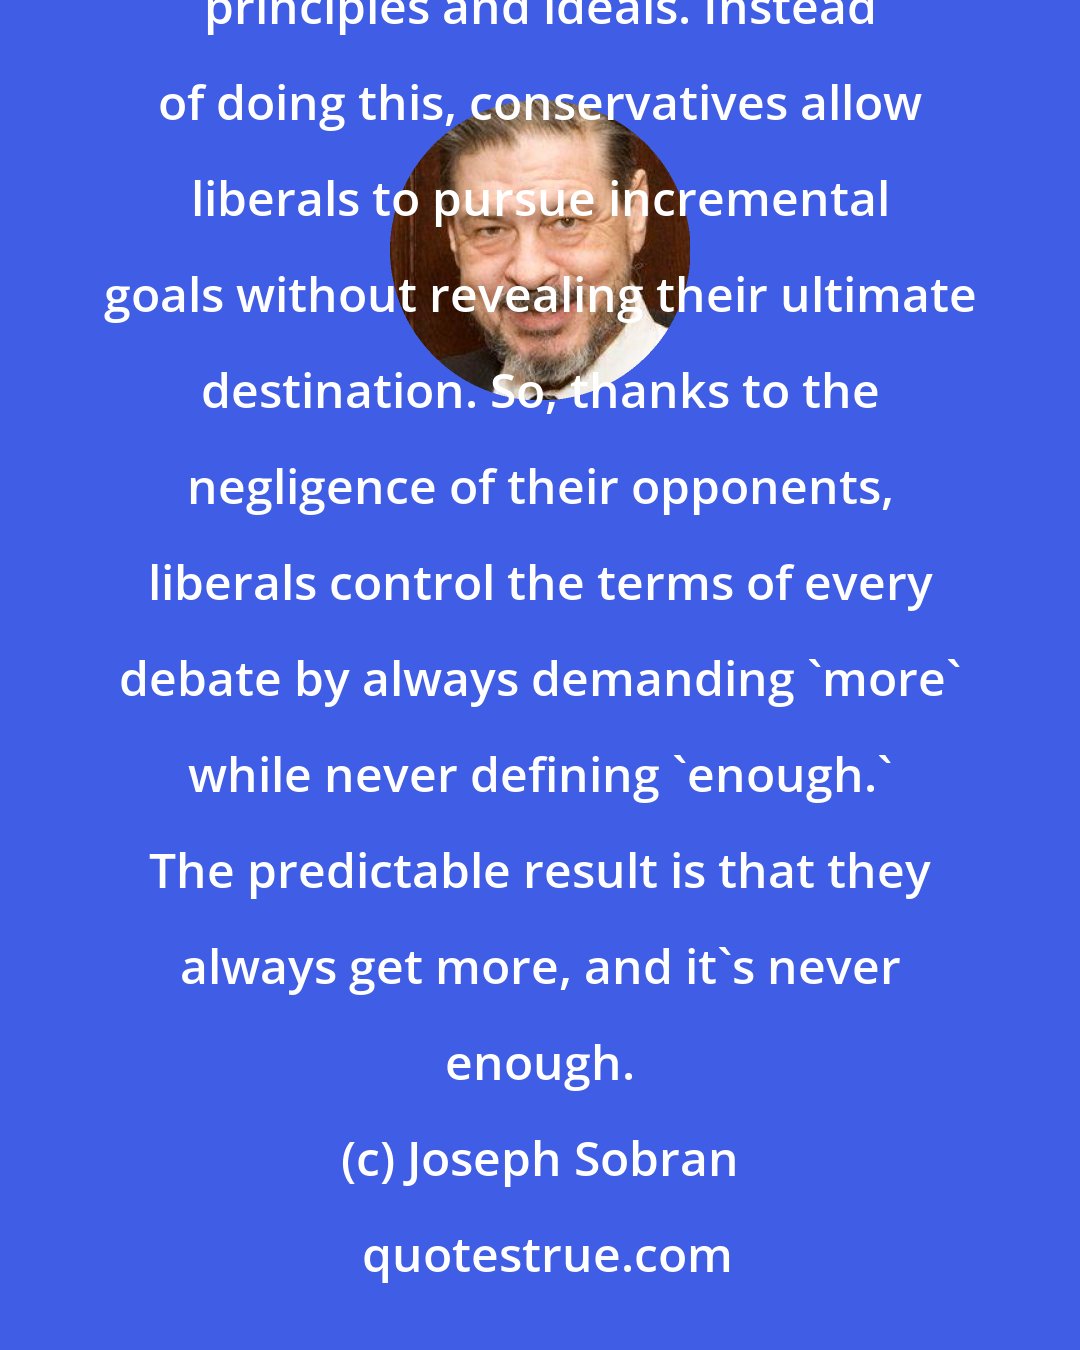 Joseph Sobran: Liberals have a new wish every time their latest wish is granted. Conservatives should make them spell out their principles and ideals. Instead of doing this, conservatives allow liberals to pursue incremental goals without revealing their ultimate destination. So, thanks to the negligence of their opponents, liberals control the terms of every debate by always demanding 'more' while never defining 'enough.' The predictable result is that they always get more, and it's never enough.